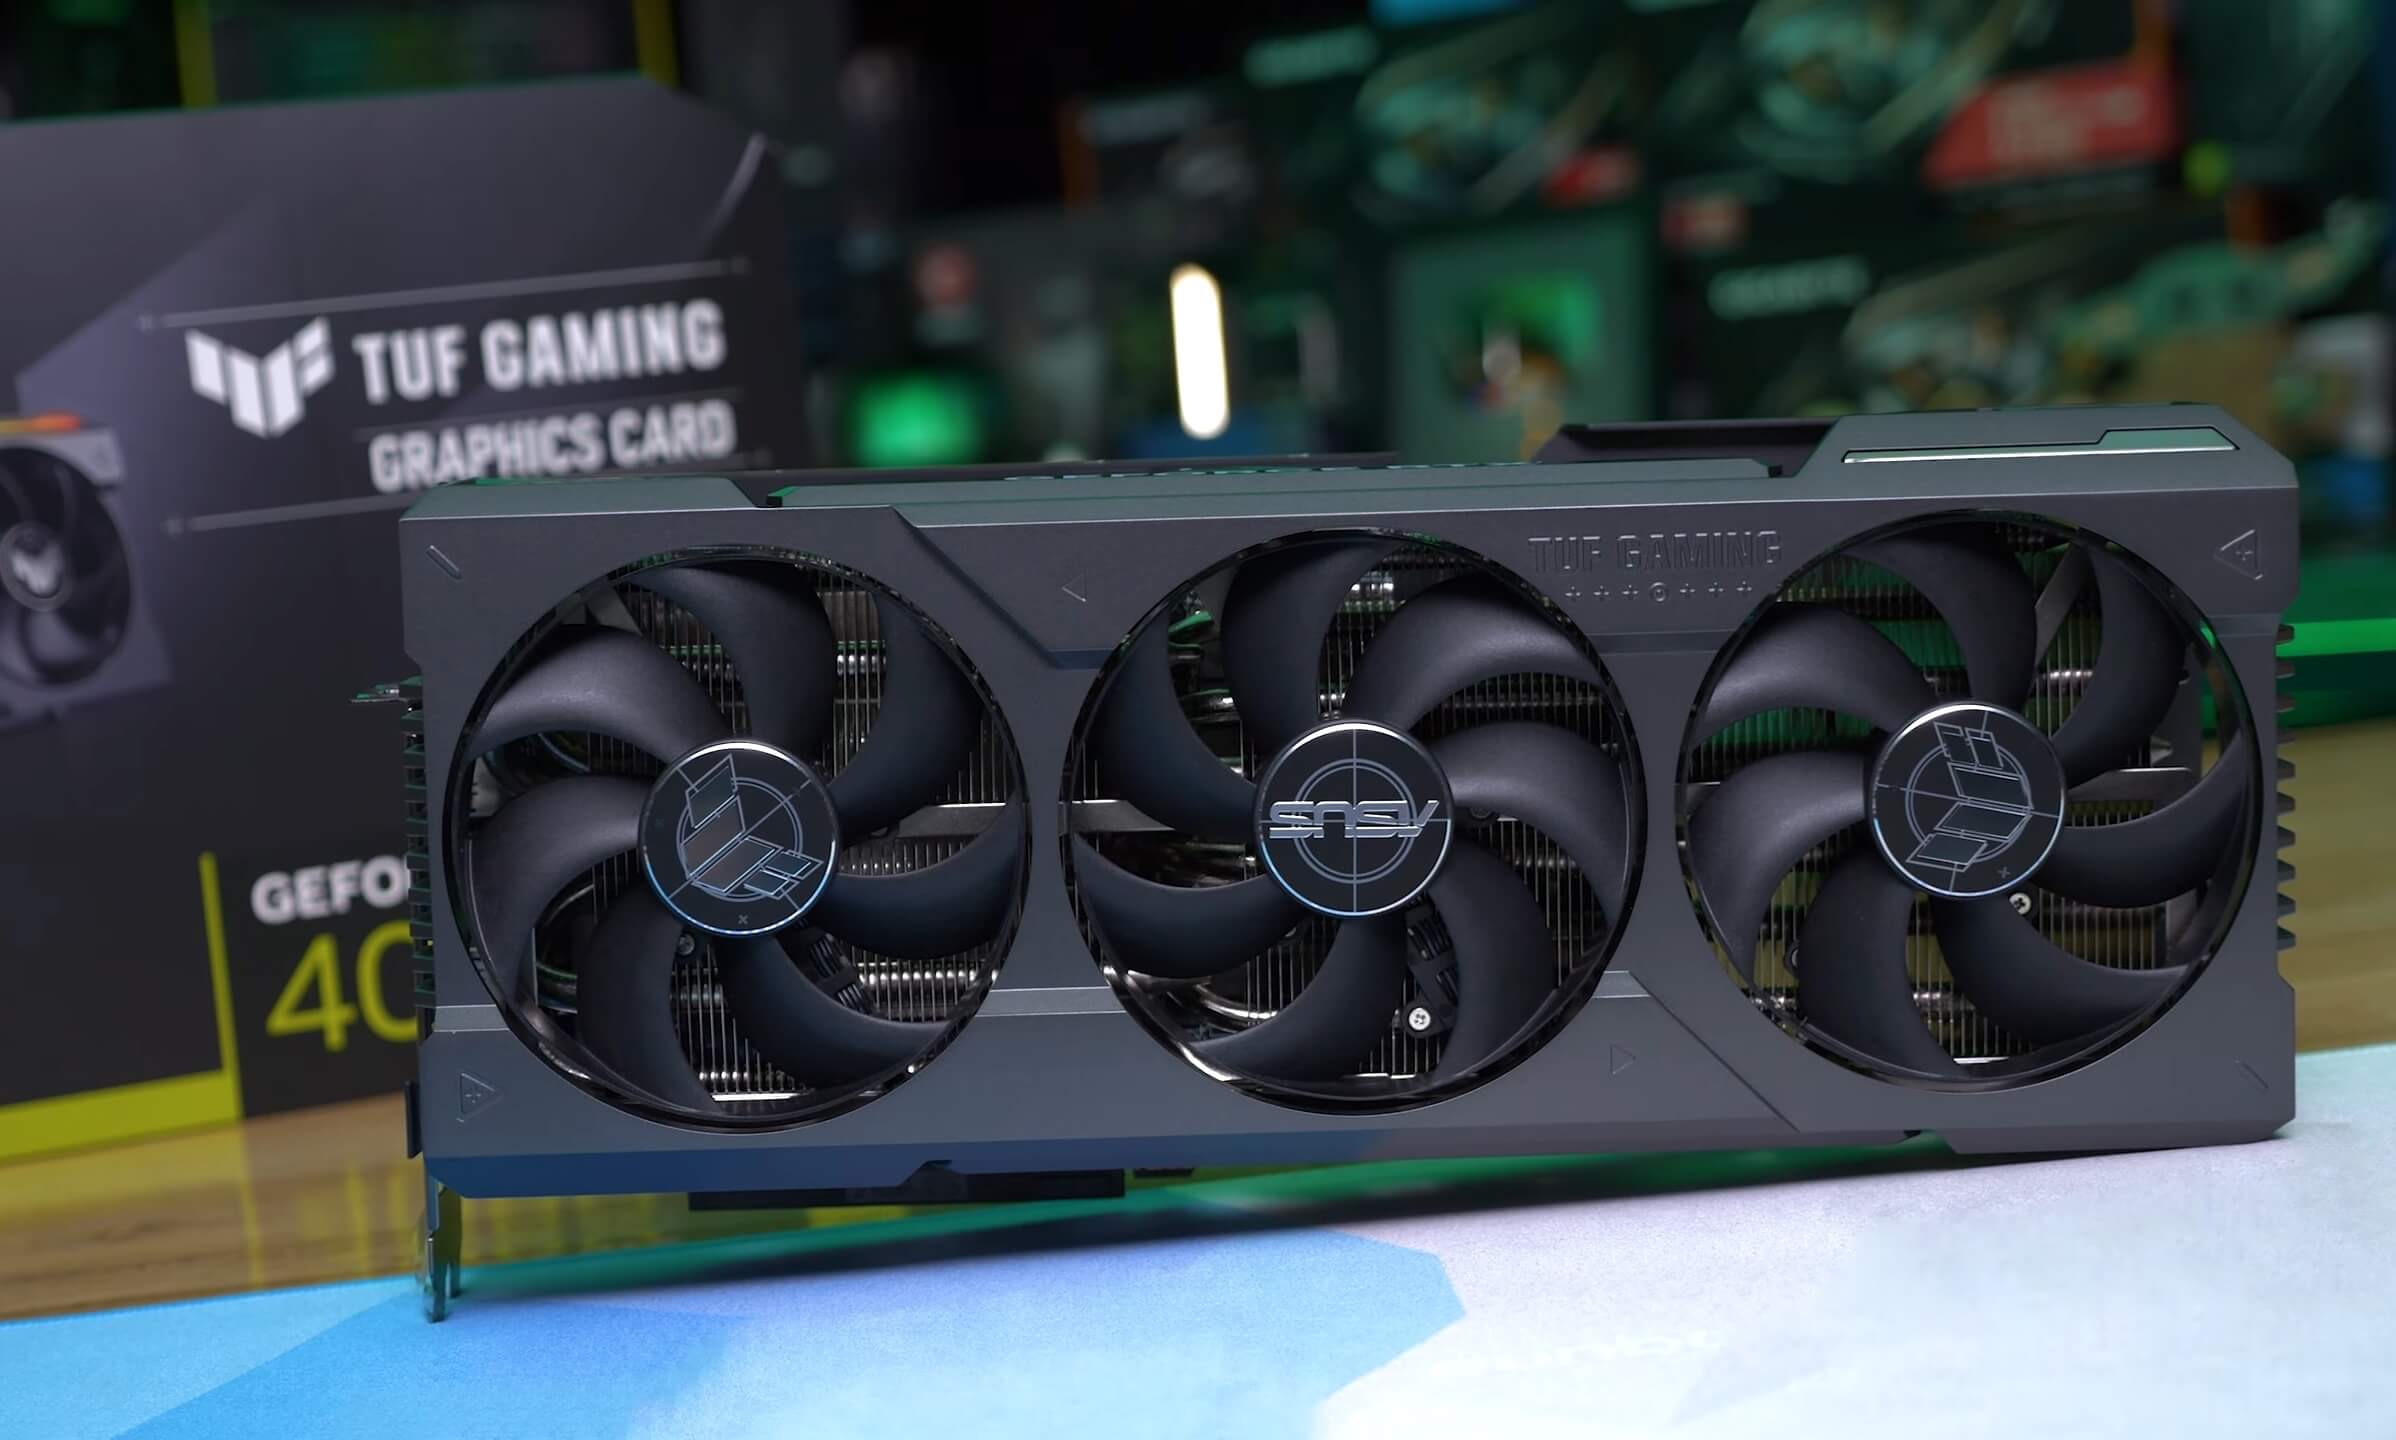 Upcoming Nvidia RTX 4070 might have the same core count as the RTX 3070